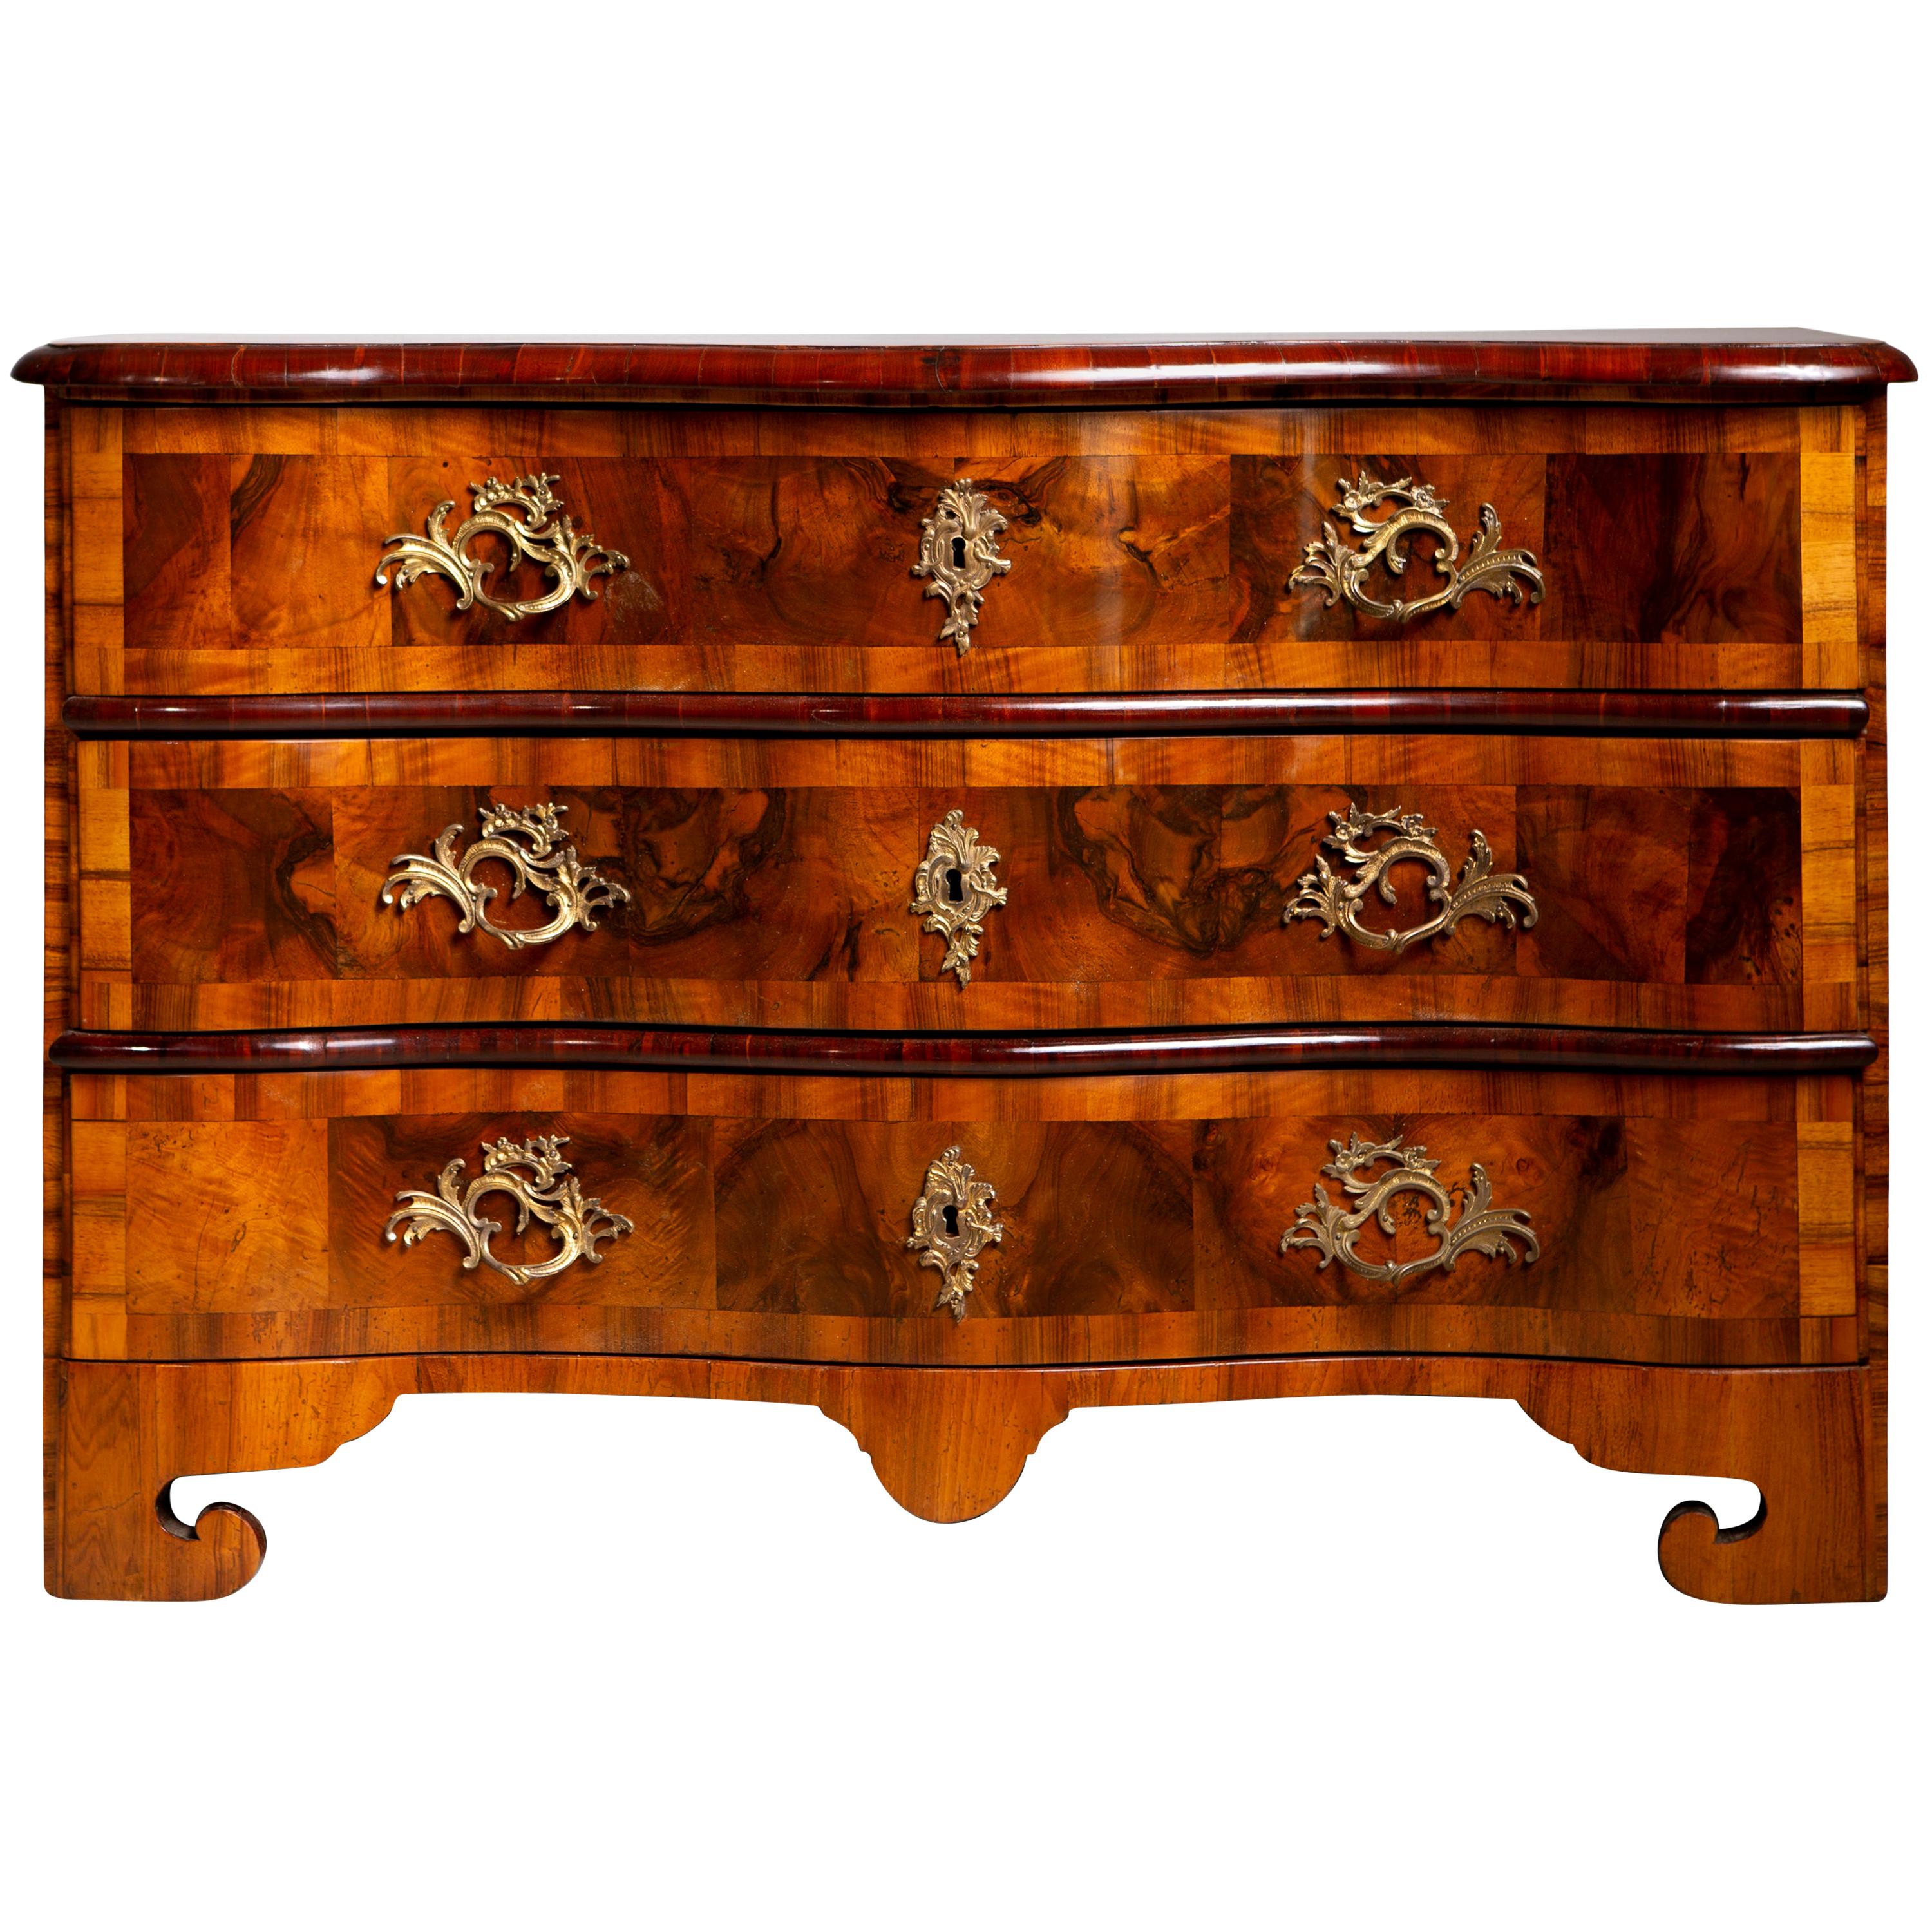 Baroque Walnut Chest of Drawers, Germany / Saxony, Mid-18th Century